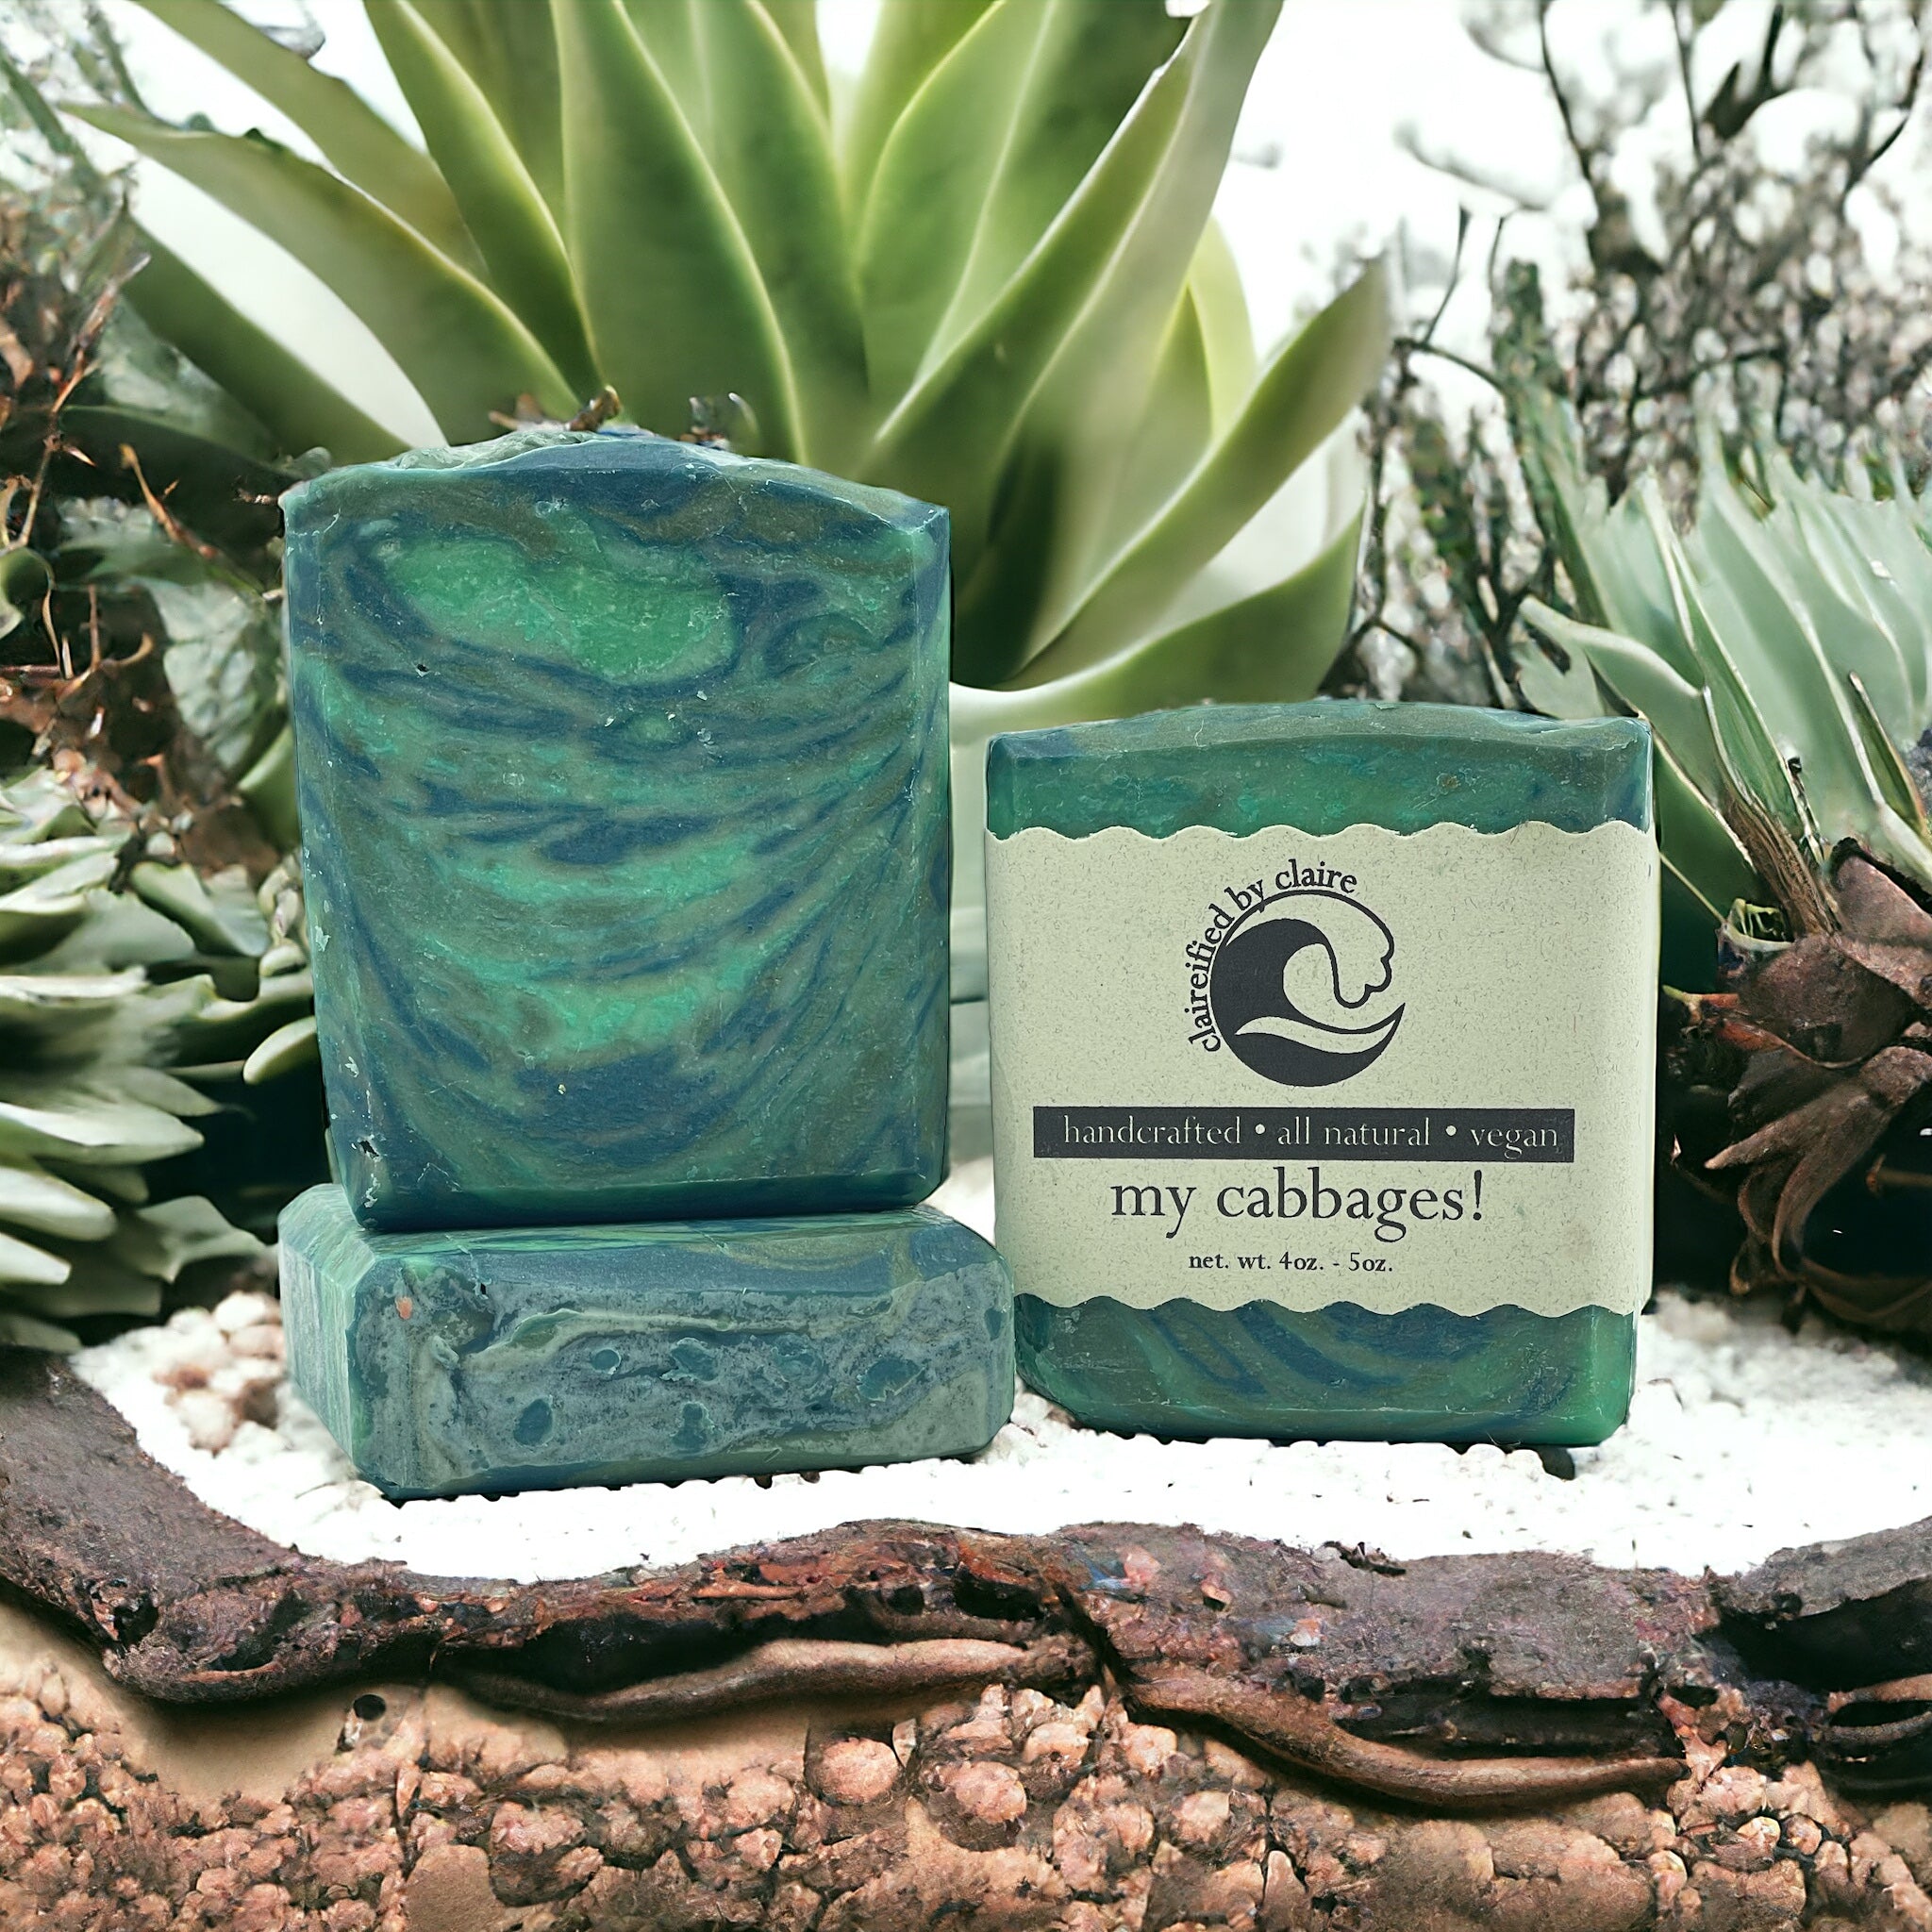 My Cabbages! Handmade Soap. Inspired by Avatar the Last Air Bender